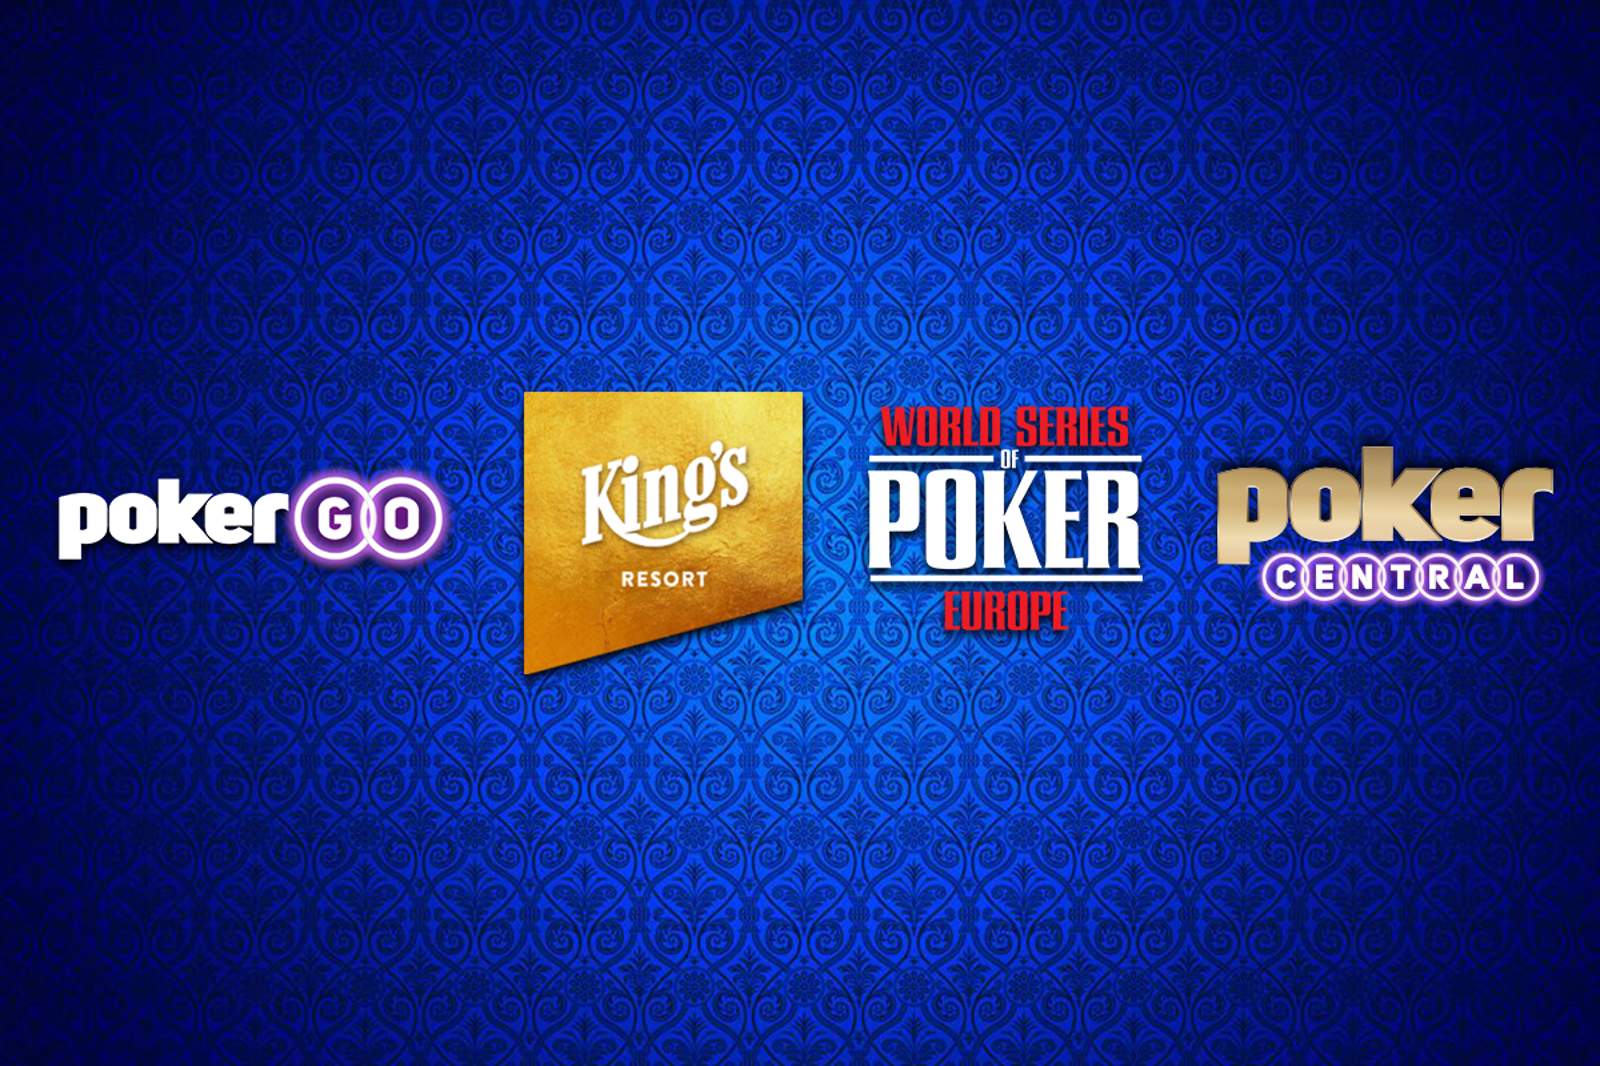 Poker Central Expands Partnership with World Series of Poker to Stream WSOPE Exclusively on PokerGO